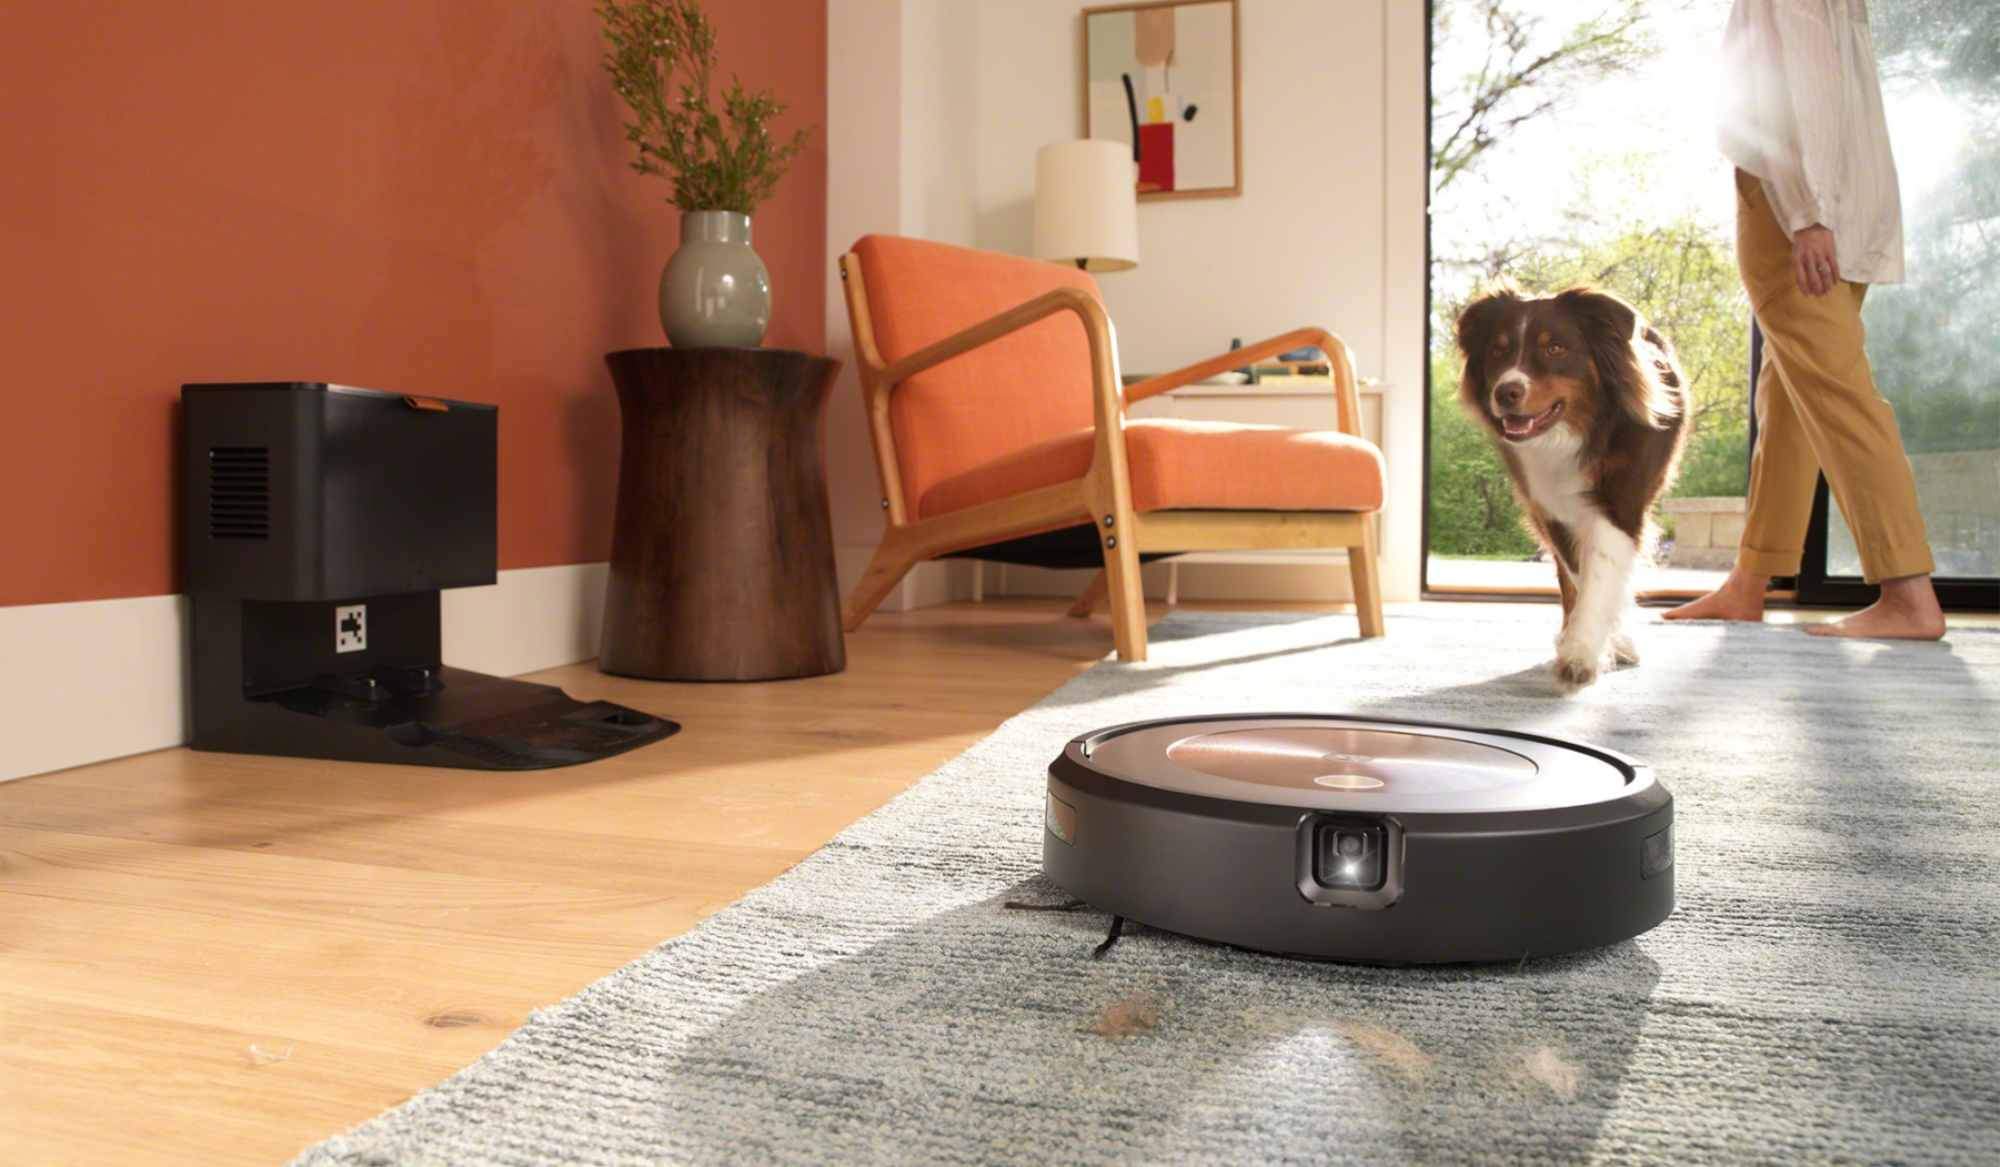 Roomba with camera and headlight cleaning rug with dock, dog, and person in background